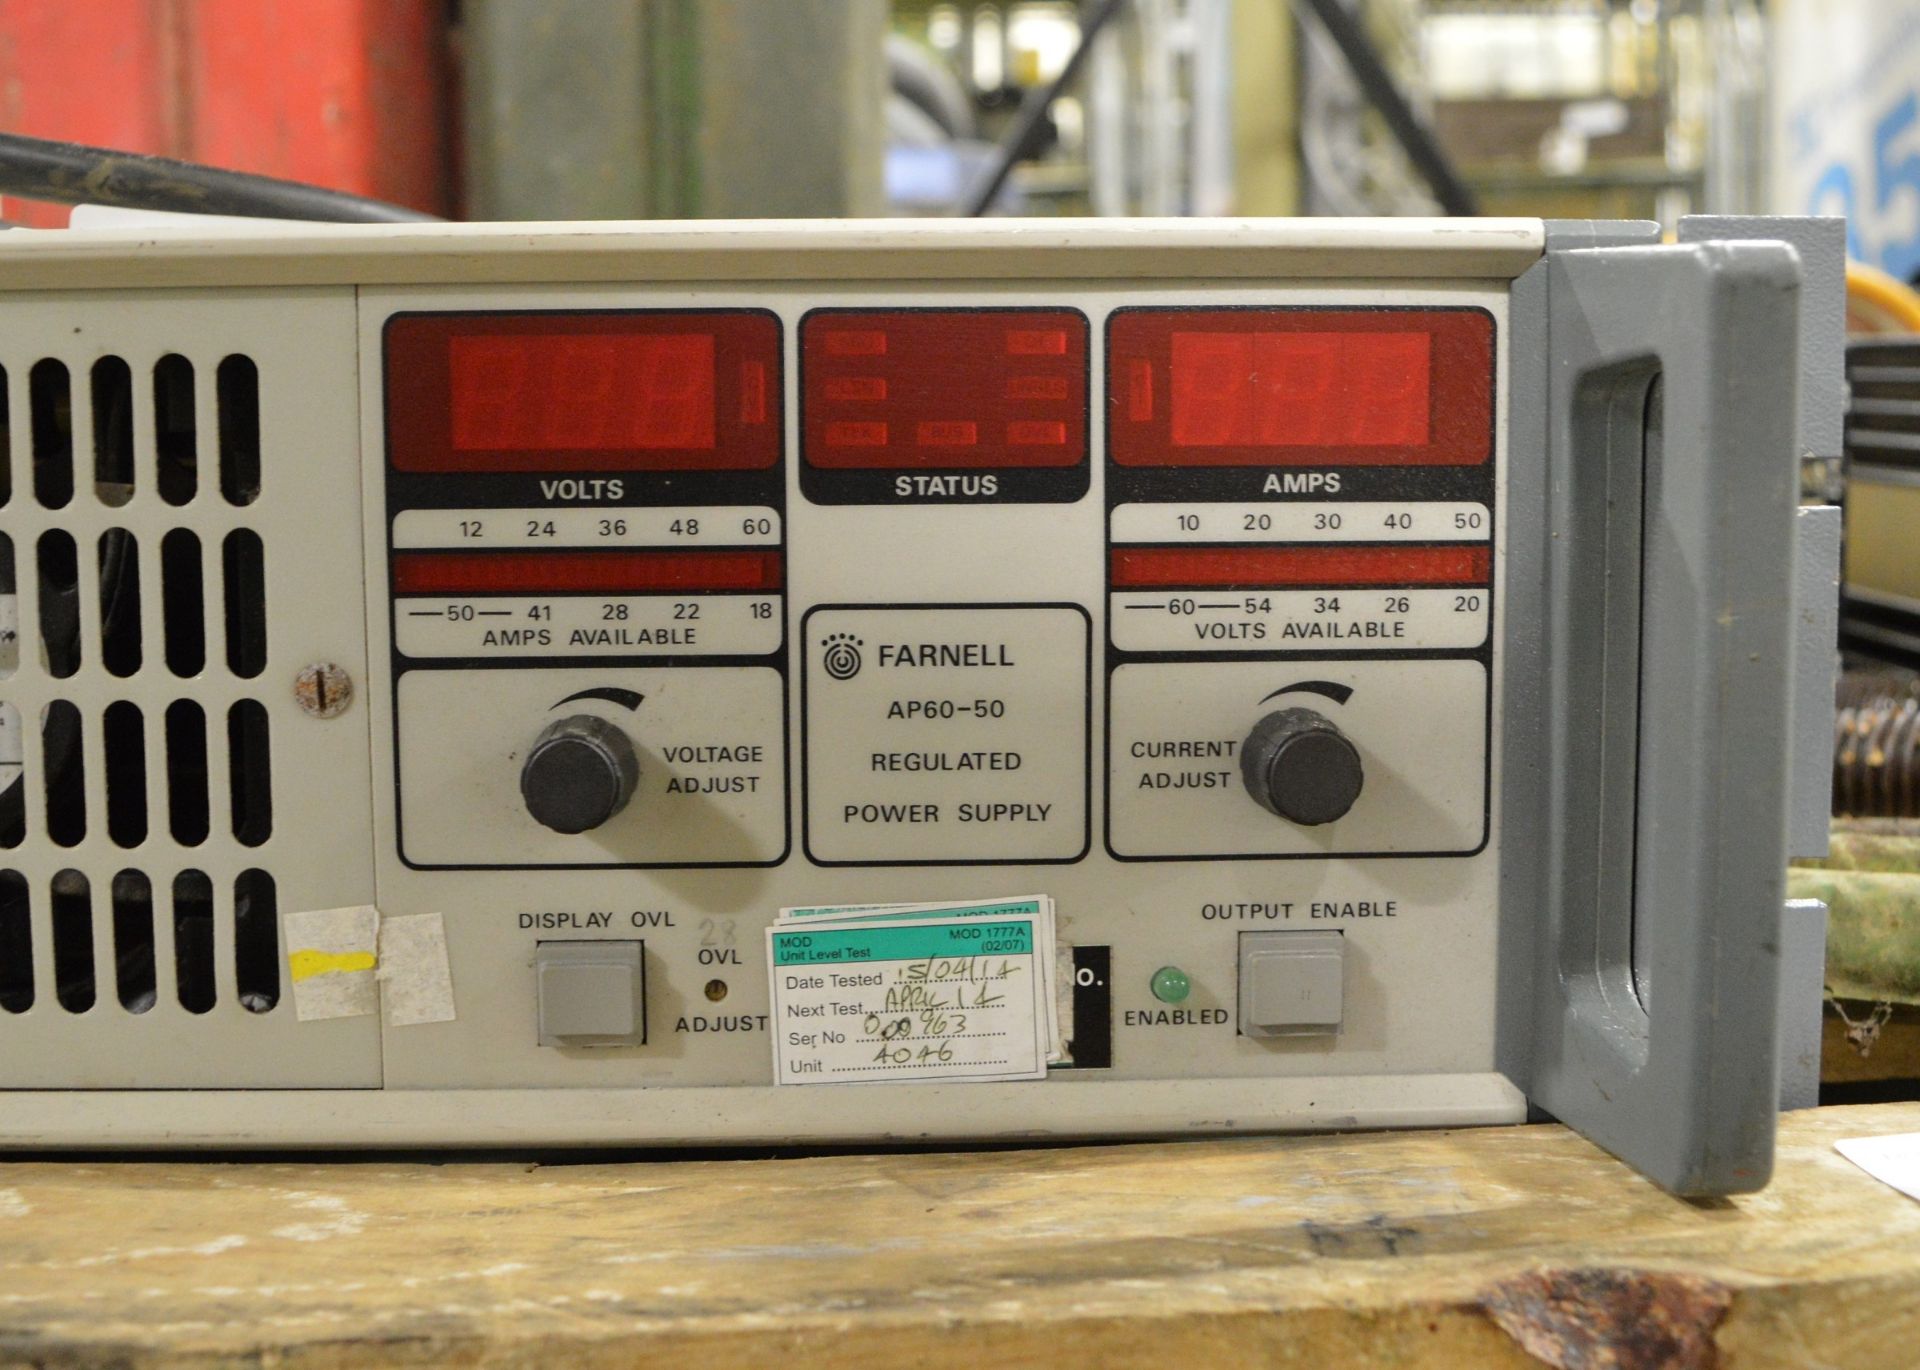 Farnell AP60 - 50 regulated power supply - Image 2 of 2